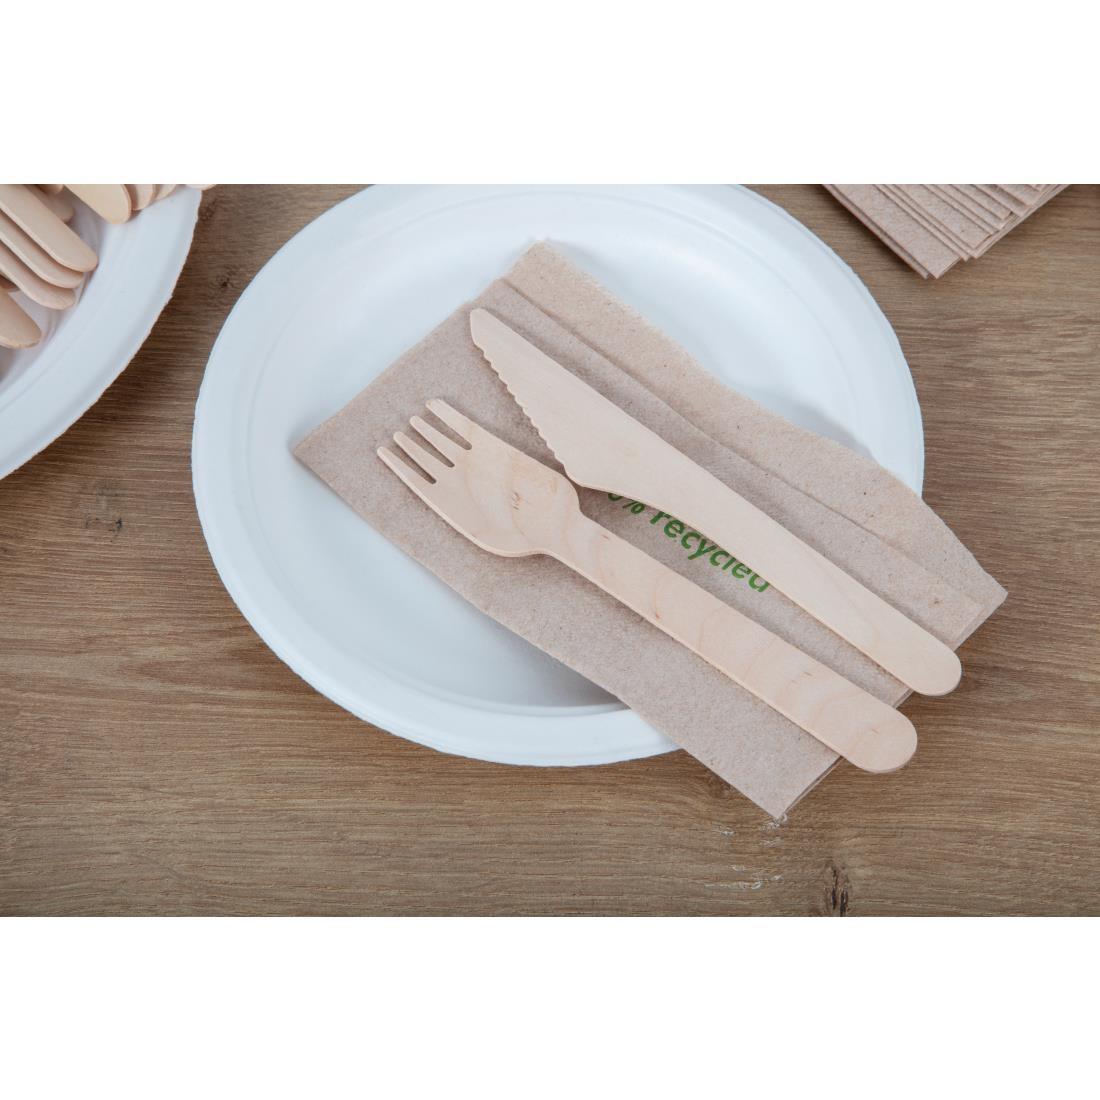 Fiesta Compostable Disposable Wooden Forks (Pack of 100) - CD903  - 8